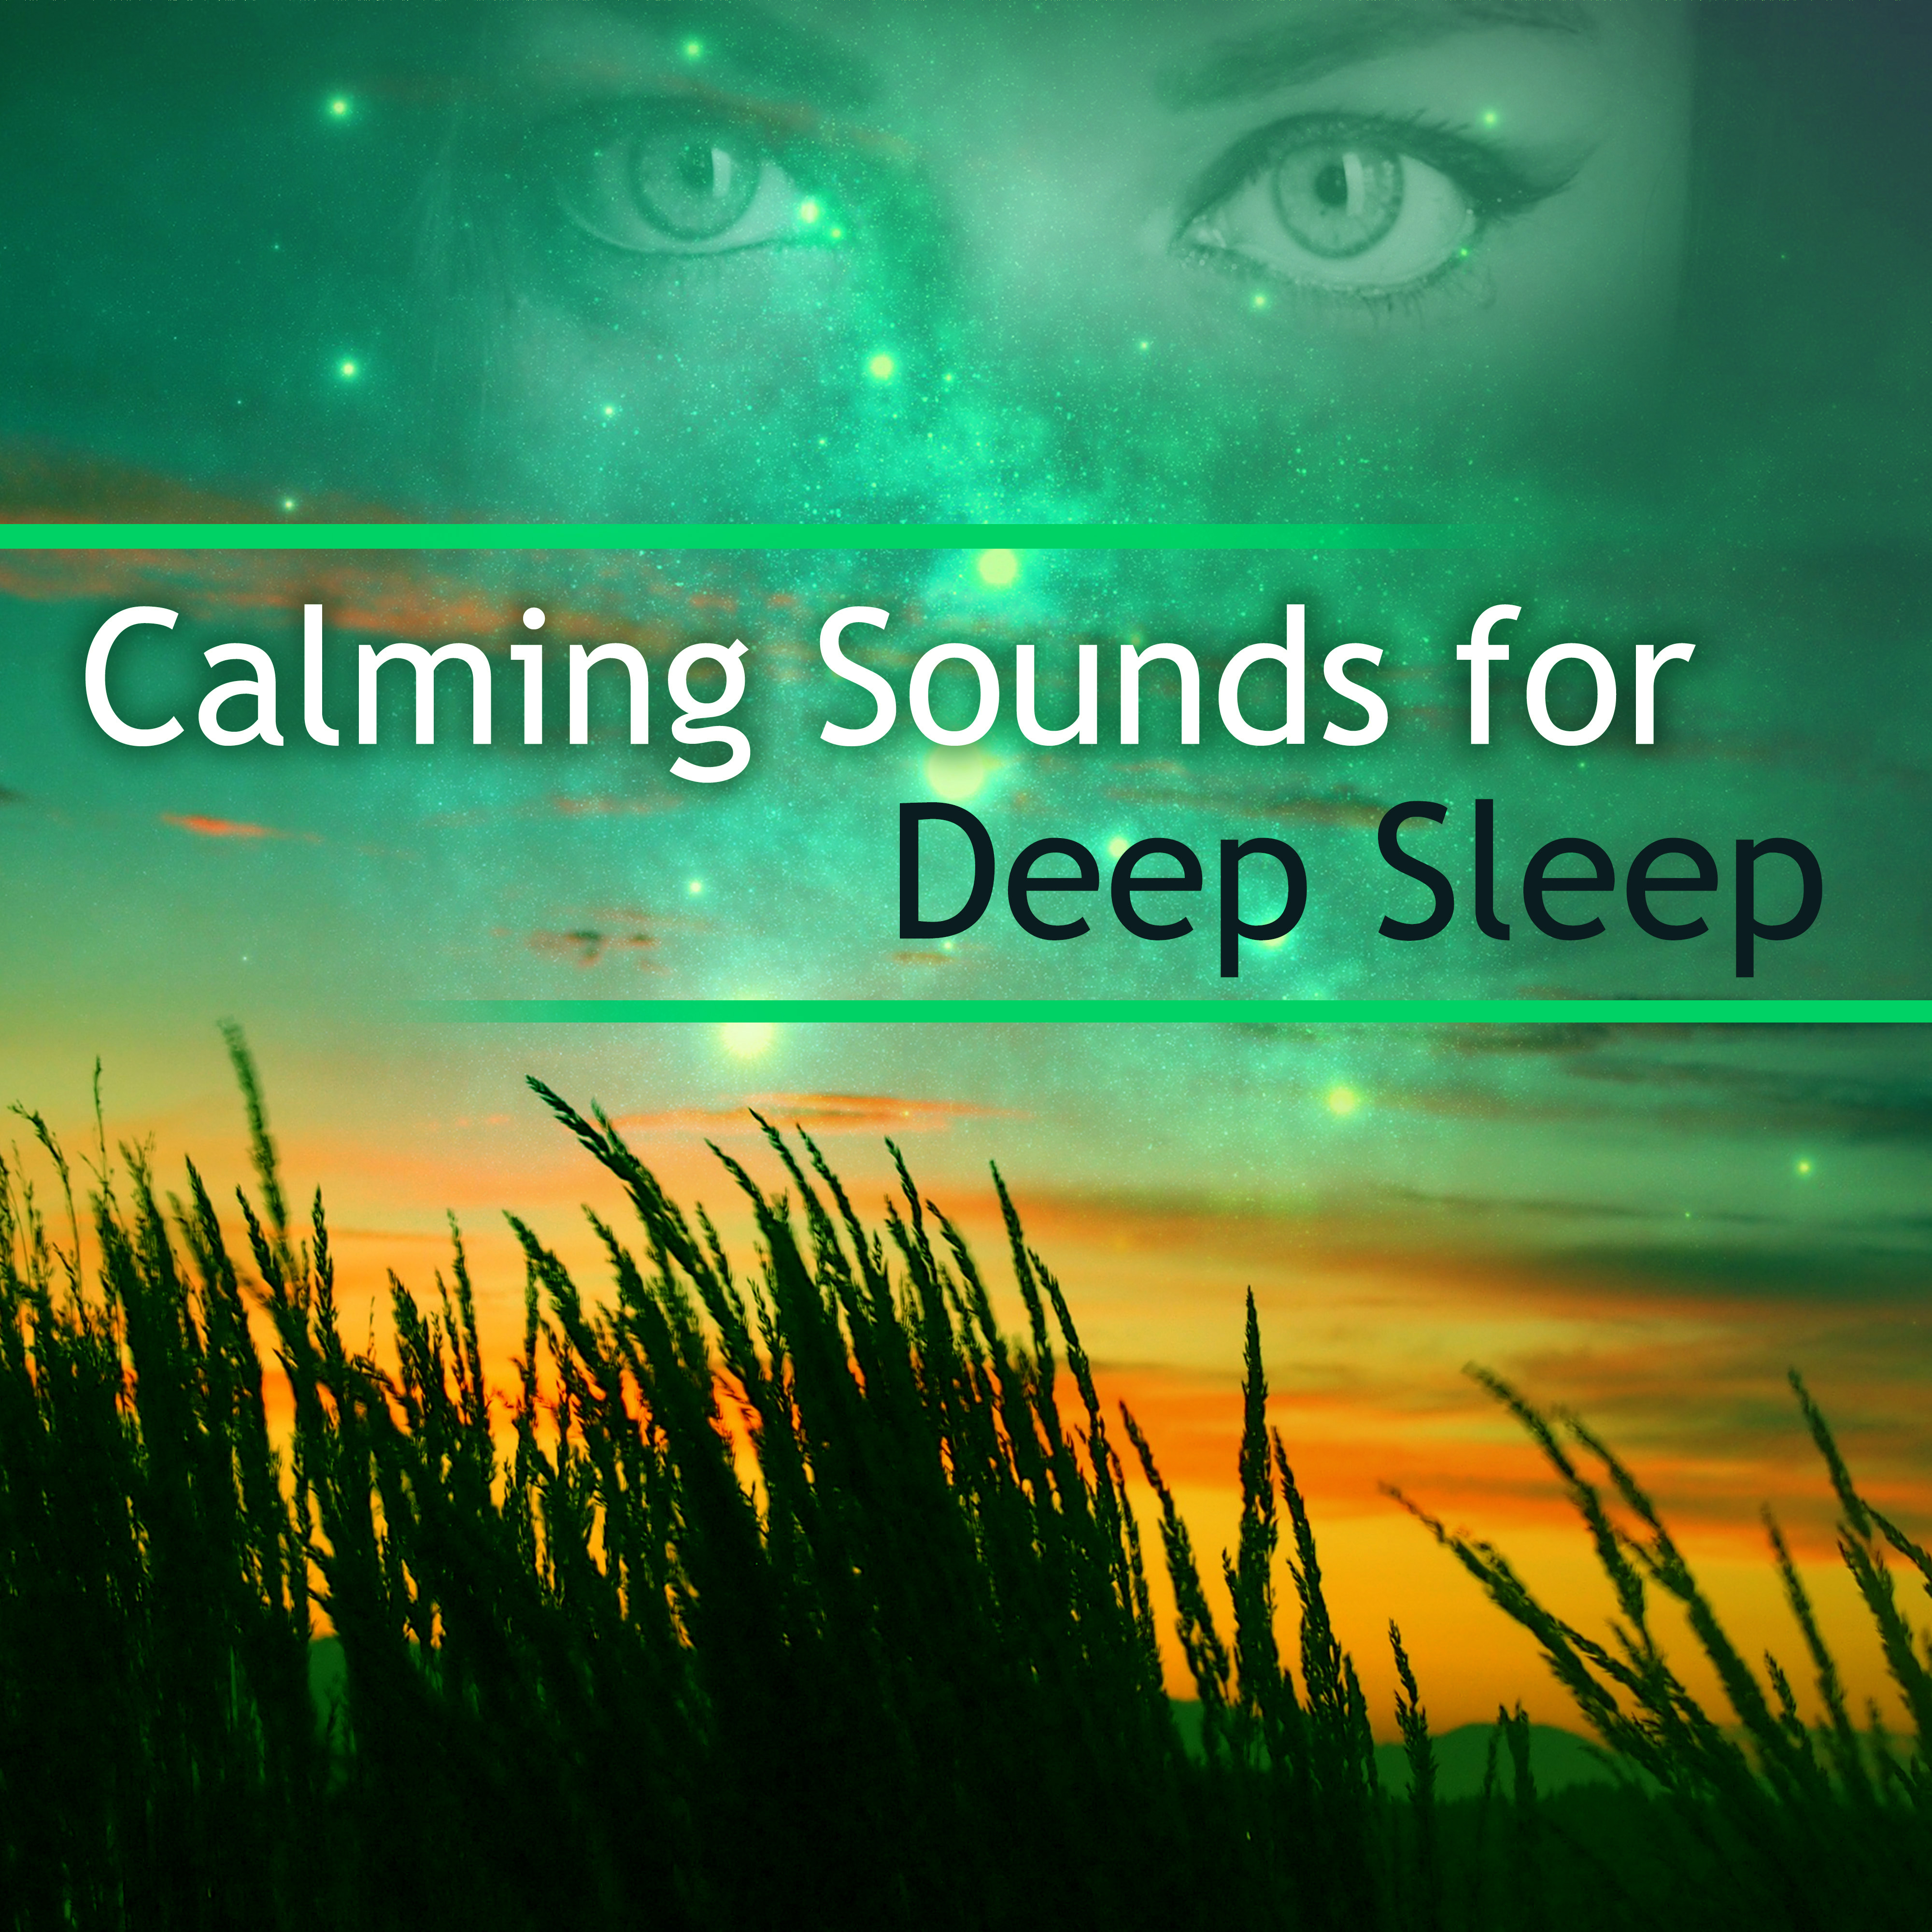 Calming Sounds for Deep Sleep – Stress Relief, Deep Sleep, Soothing Sounds, New Age Relaxation, Peaceful Night